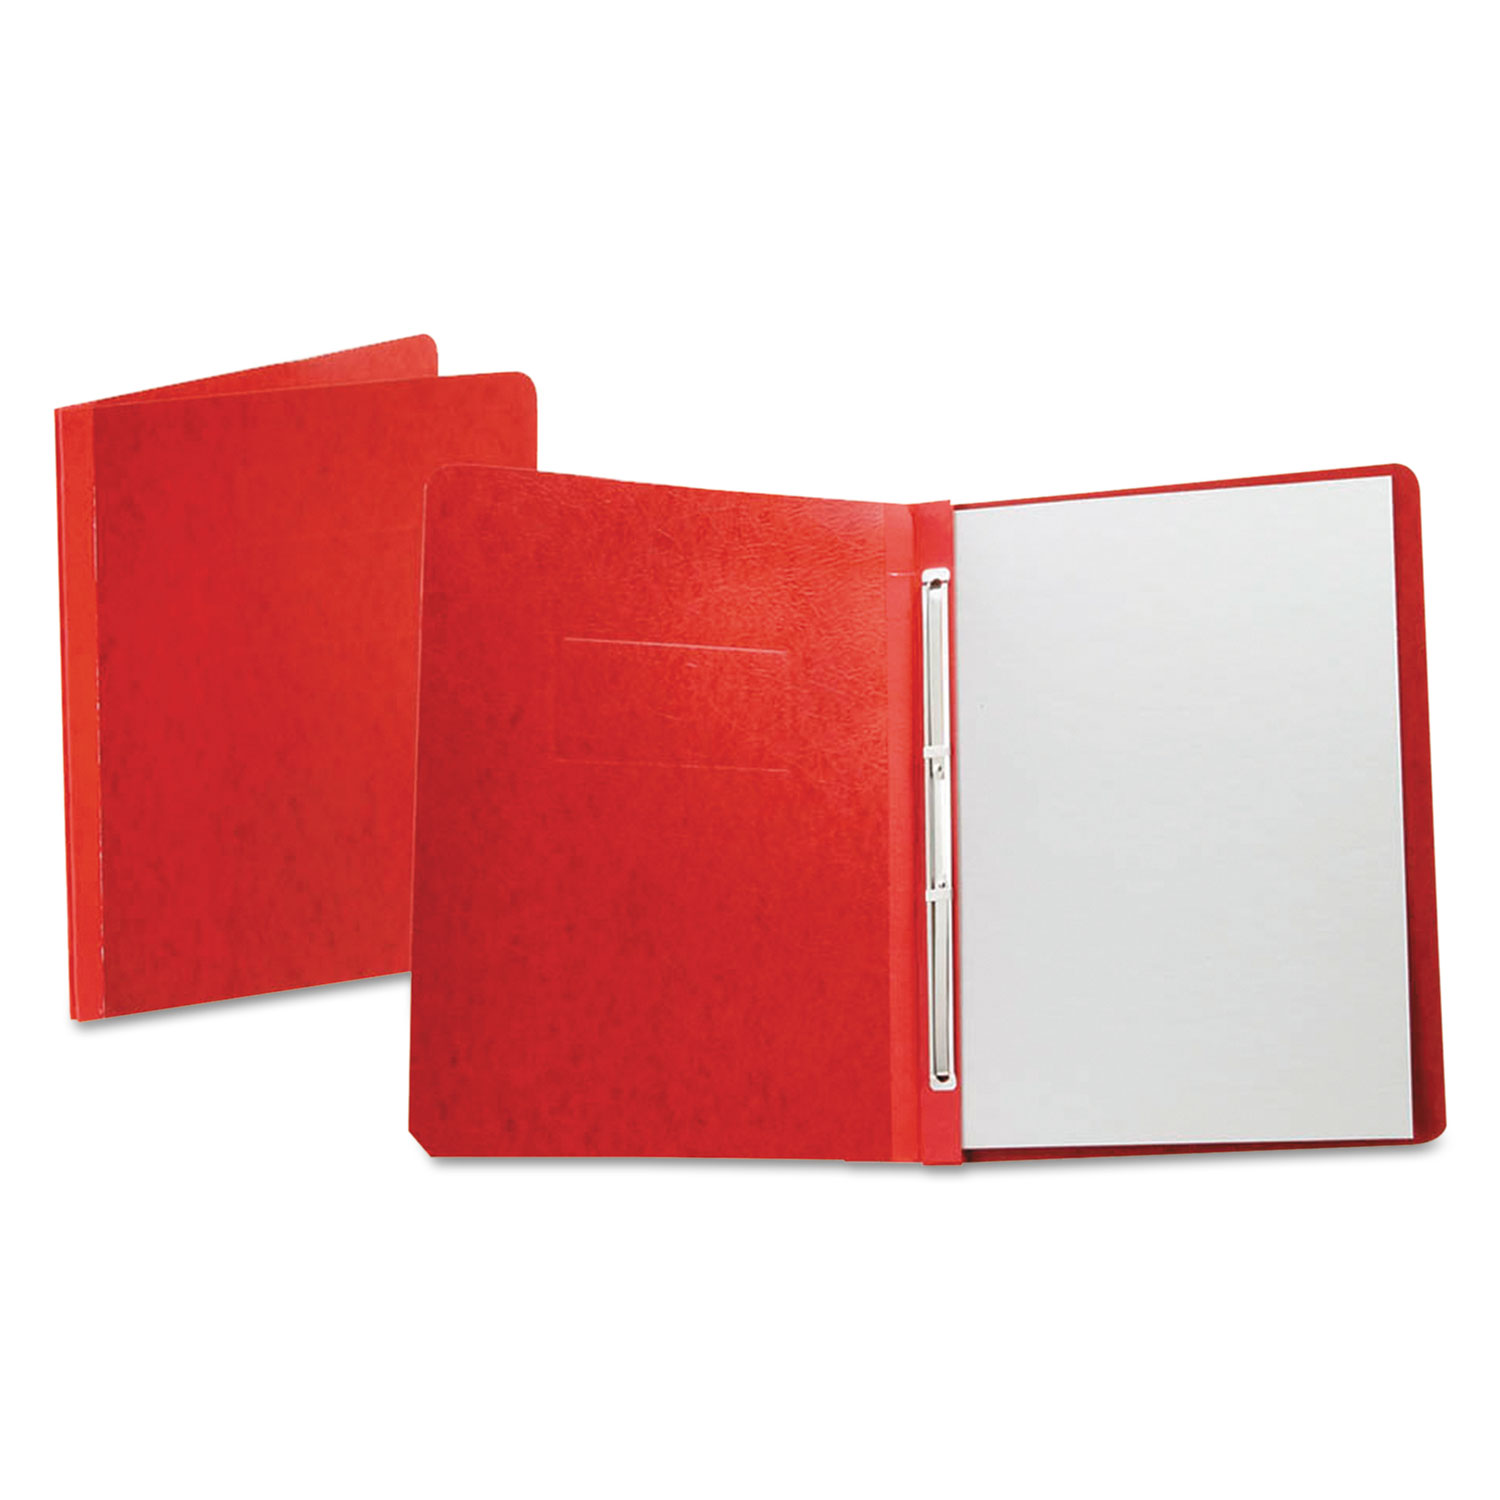  Oxford 12711 PressGuard Coated Cover, Prong Clip, Letter, 3 Capacity, Executive Red (OXF12711) 